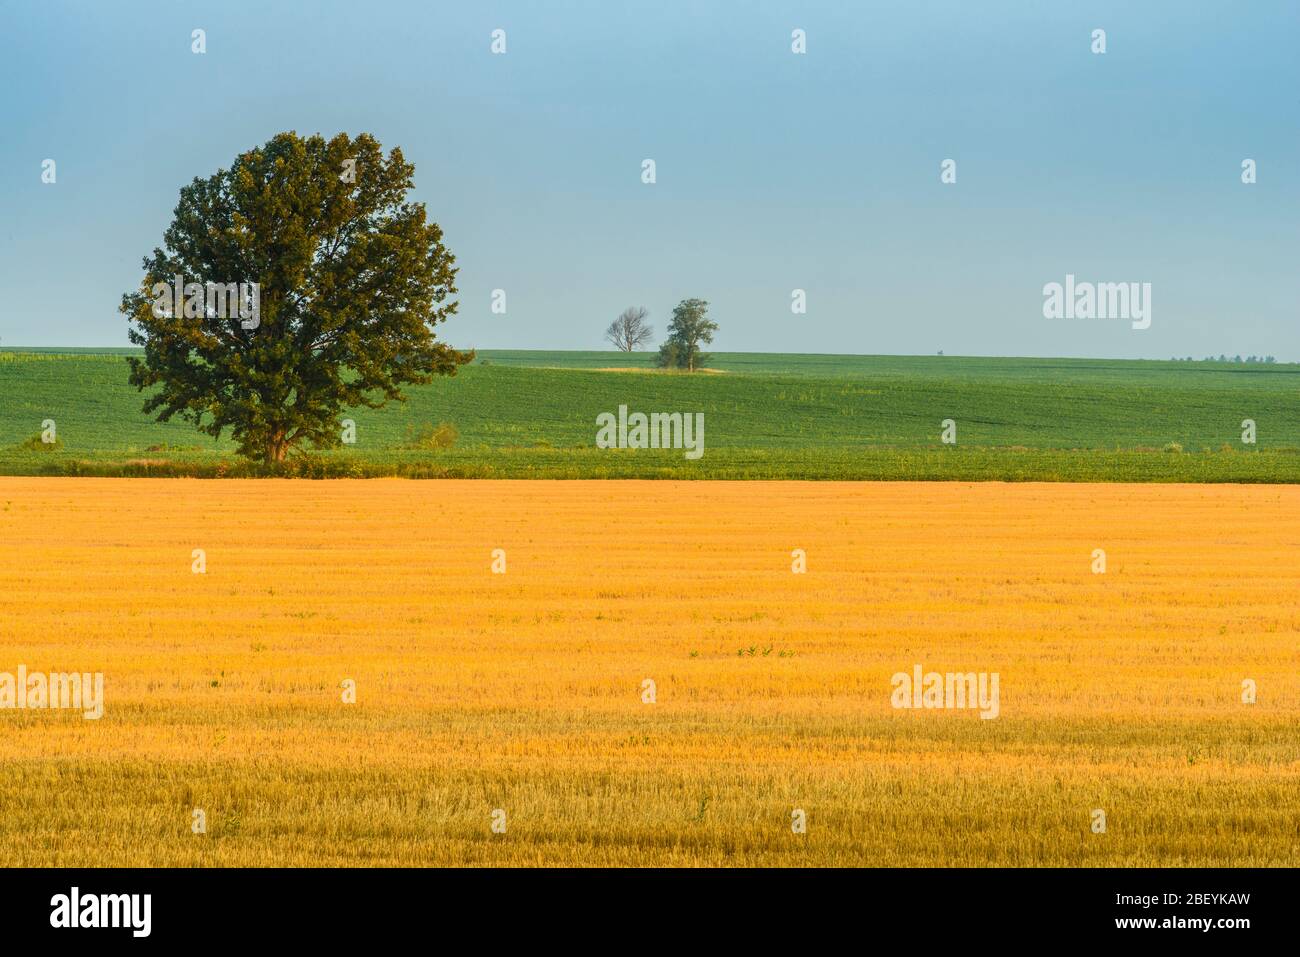 Grain stubble field and lone tree, junction Highway 7 and 23 near Elginfield, Ontario, Canada Stock Photo